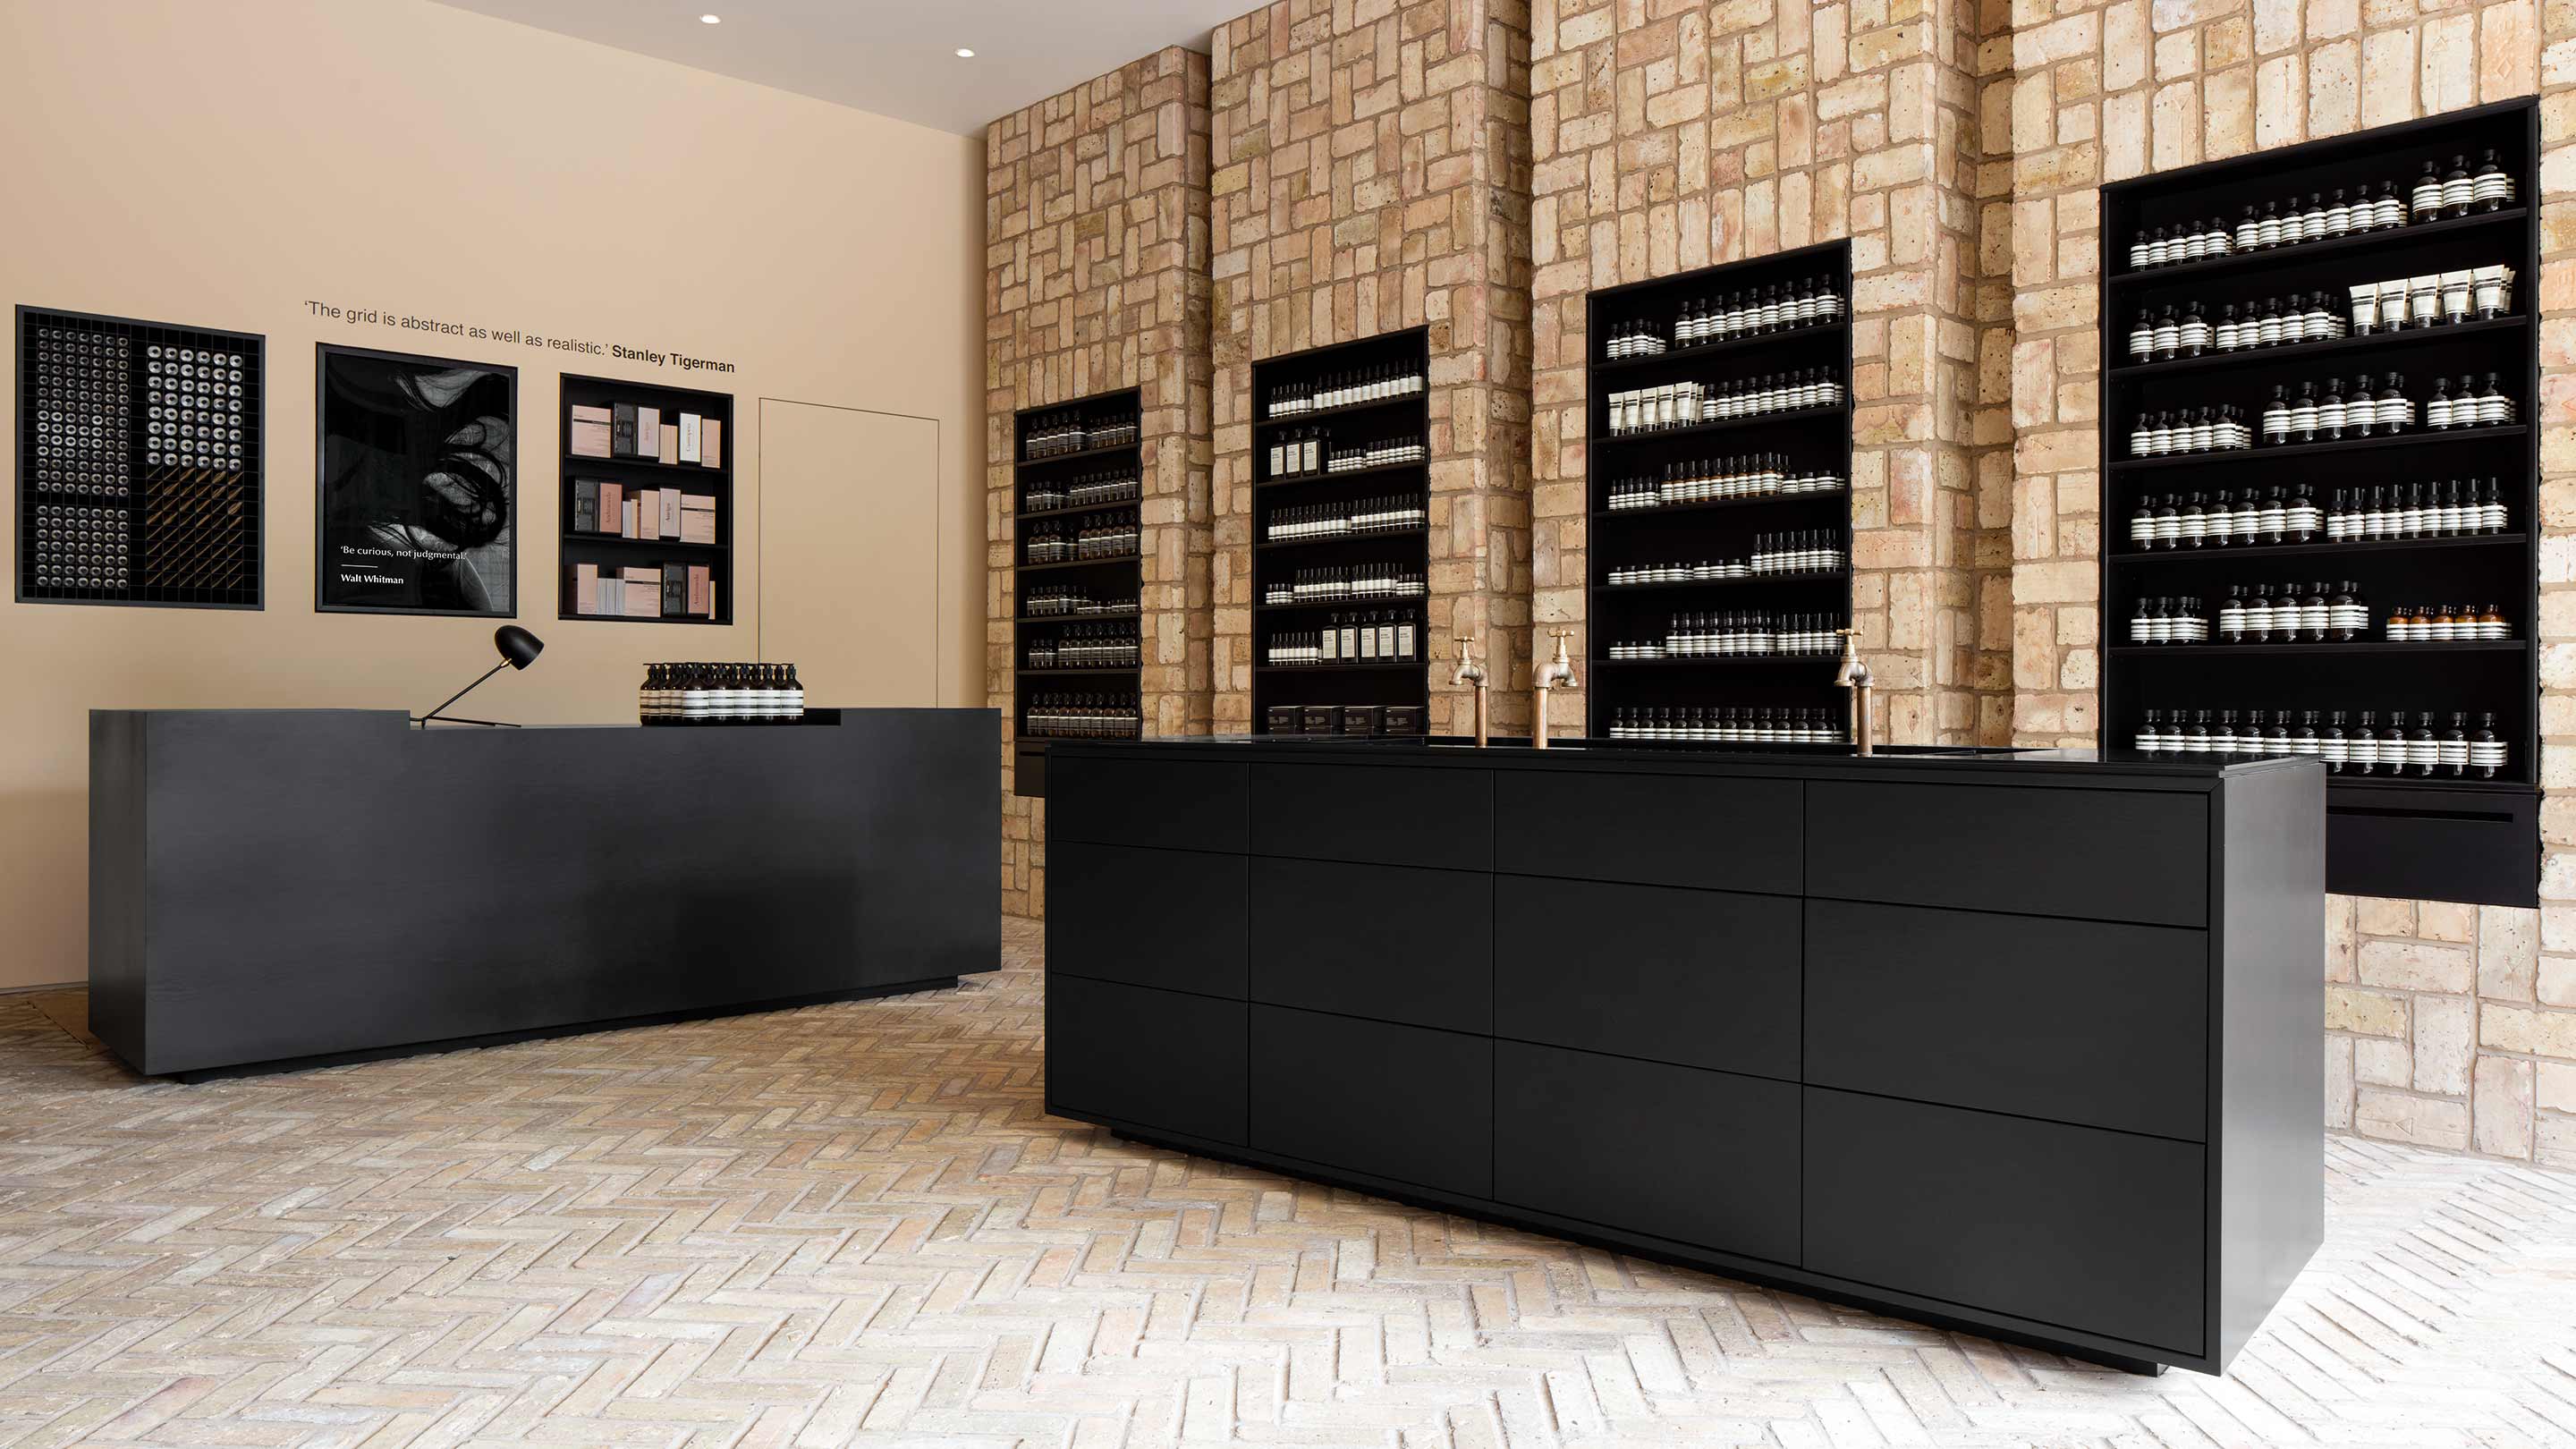 Black steel cabinets sitting on brick floor; brick walls fitted with steel shelves holding Aesop product.